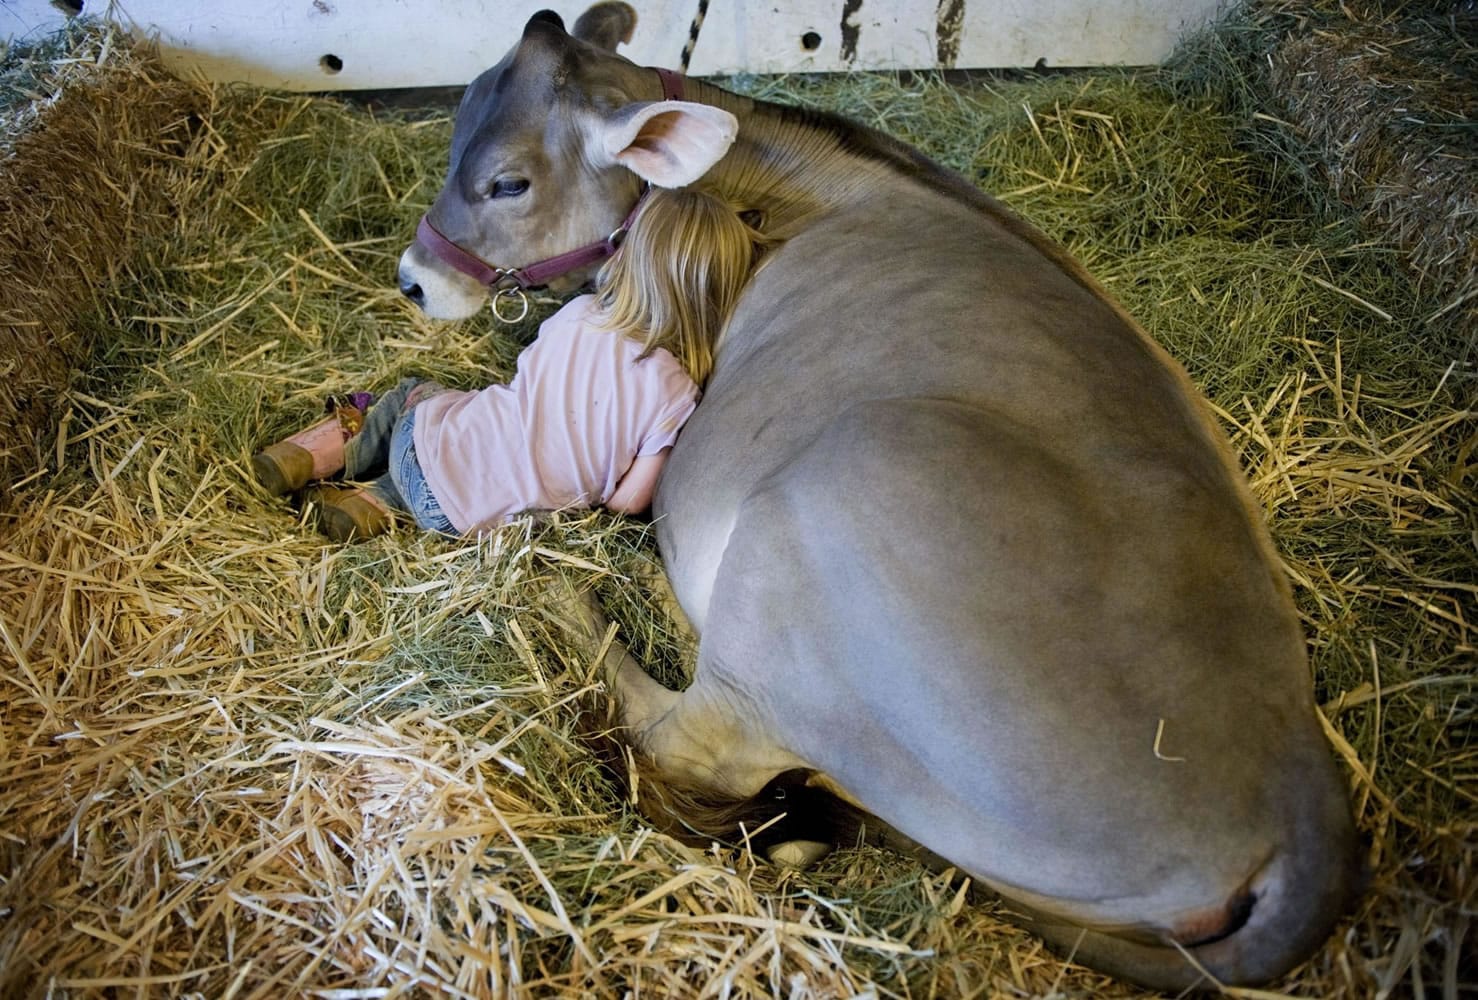 Alison Will, 3, curls up next to her brother's calf, Ellie, at the Clark County Fair in 2009.